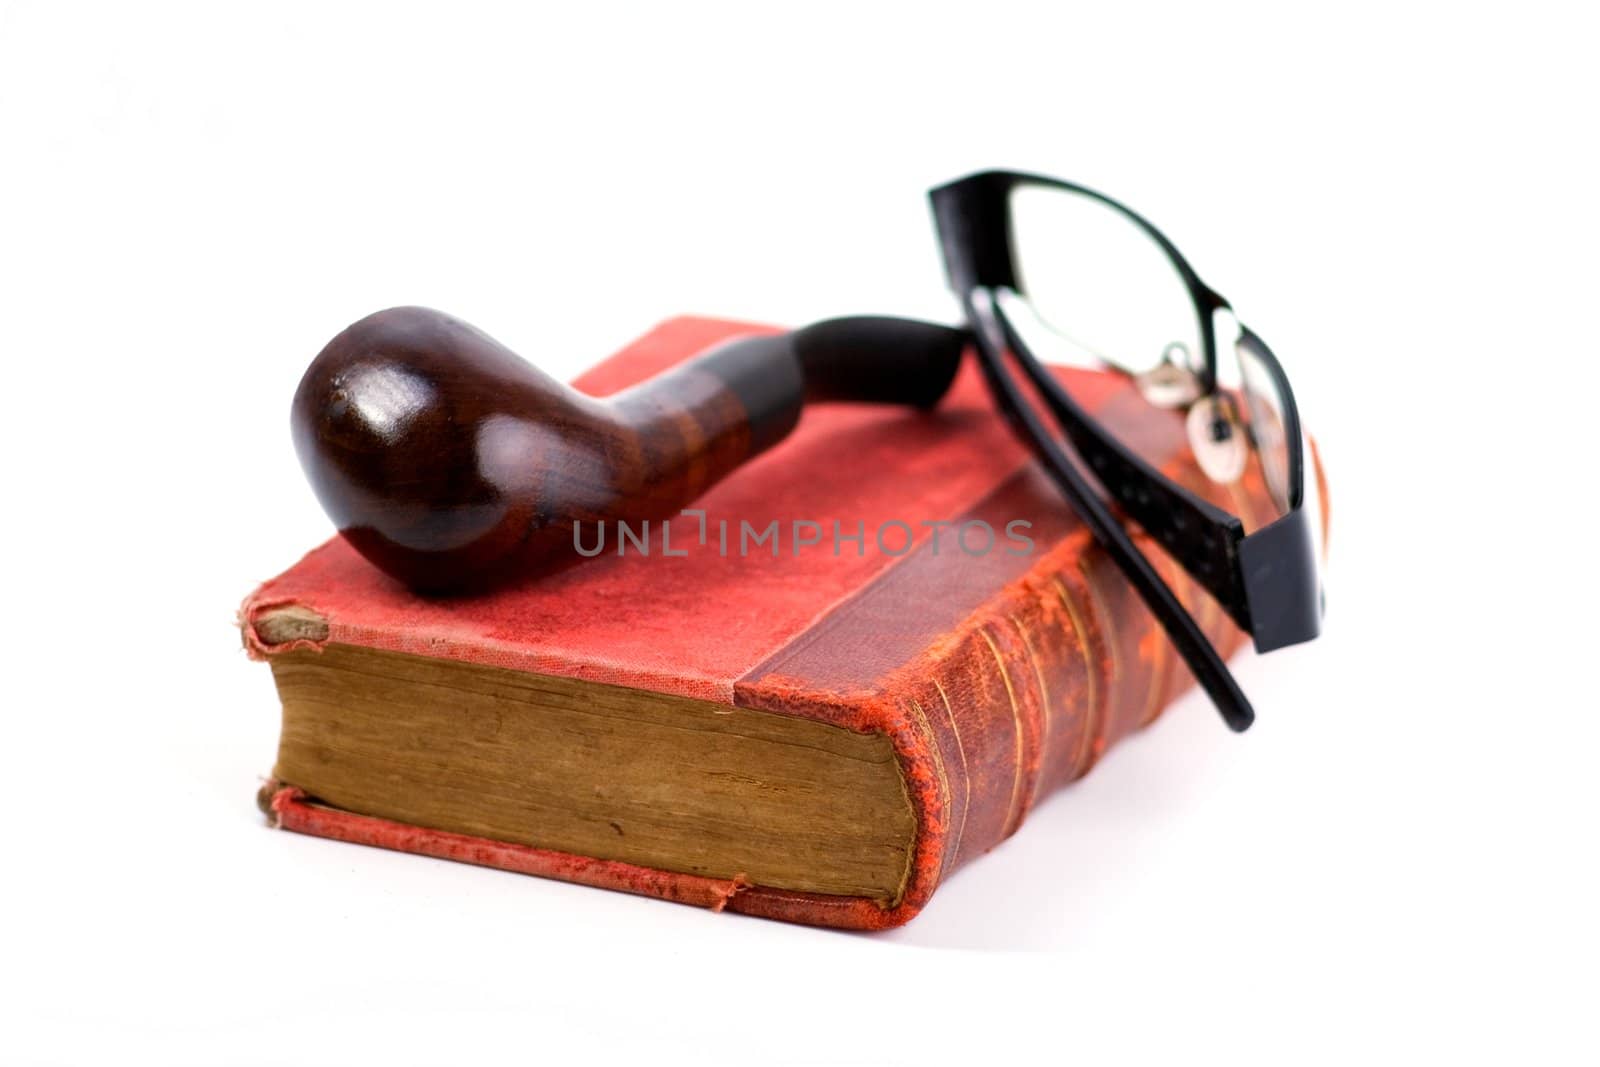 Old folio in dark red cover, pipe and black-rimmed glasses on white background. Book with ancient knowledge.